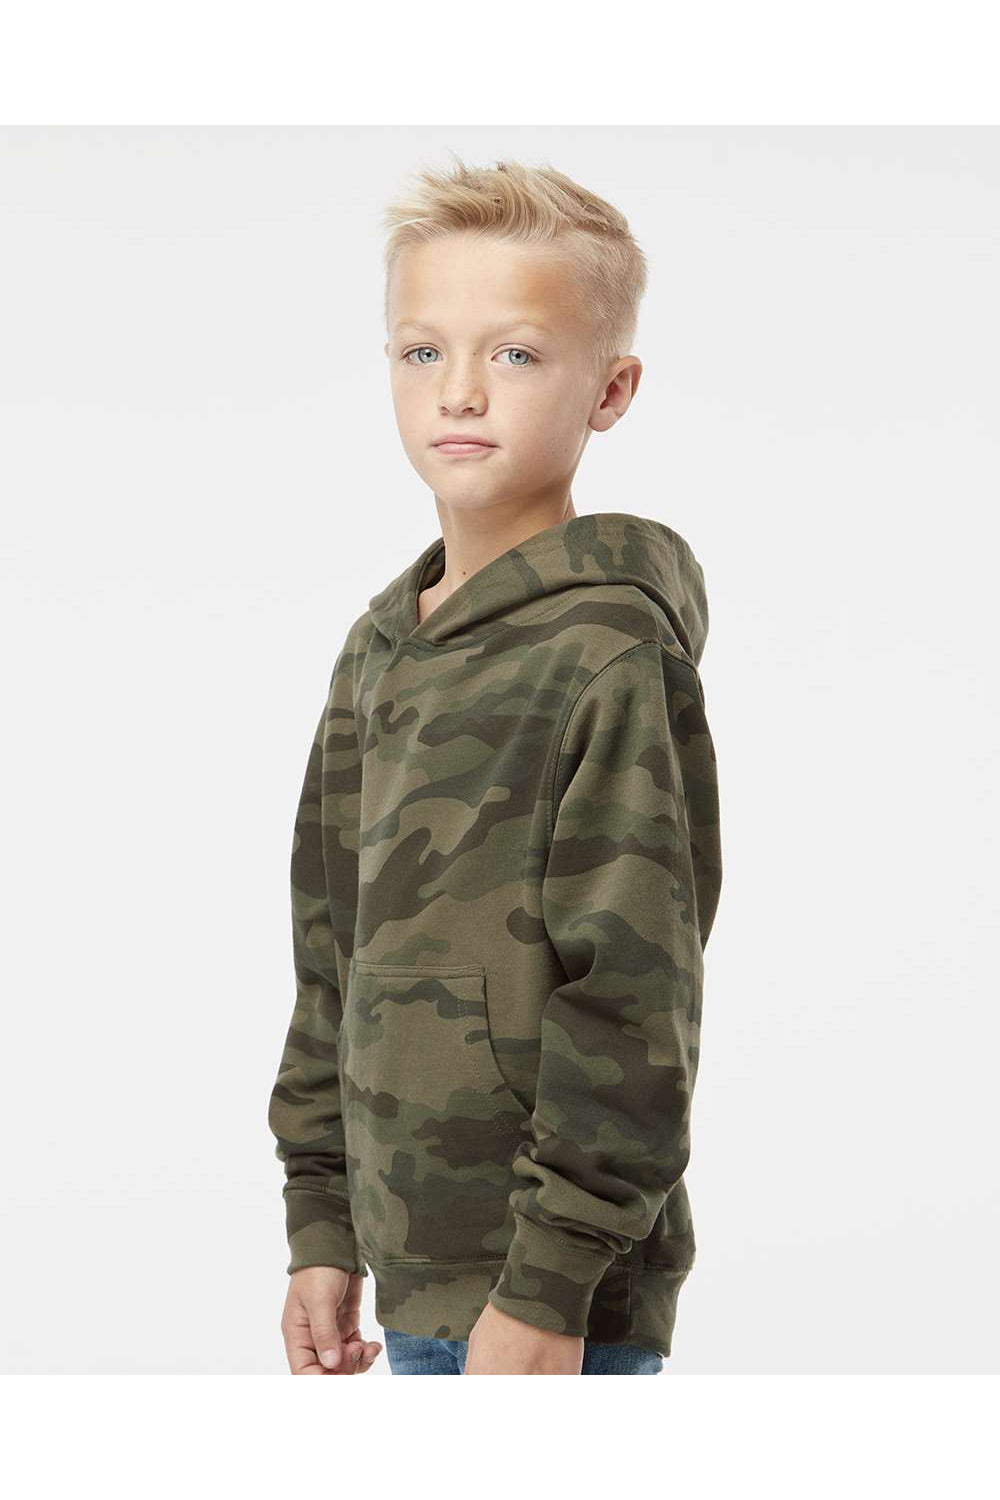 Independent Trading Co. SS4001Y Youth Hooded Sweatshirt Hoodie Forest Green Camo Model Side